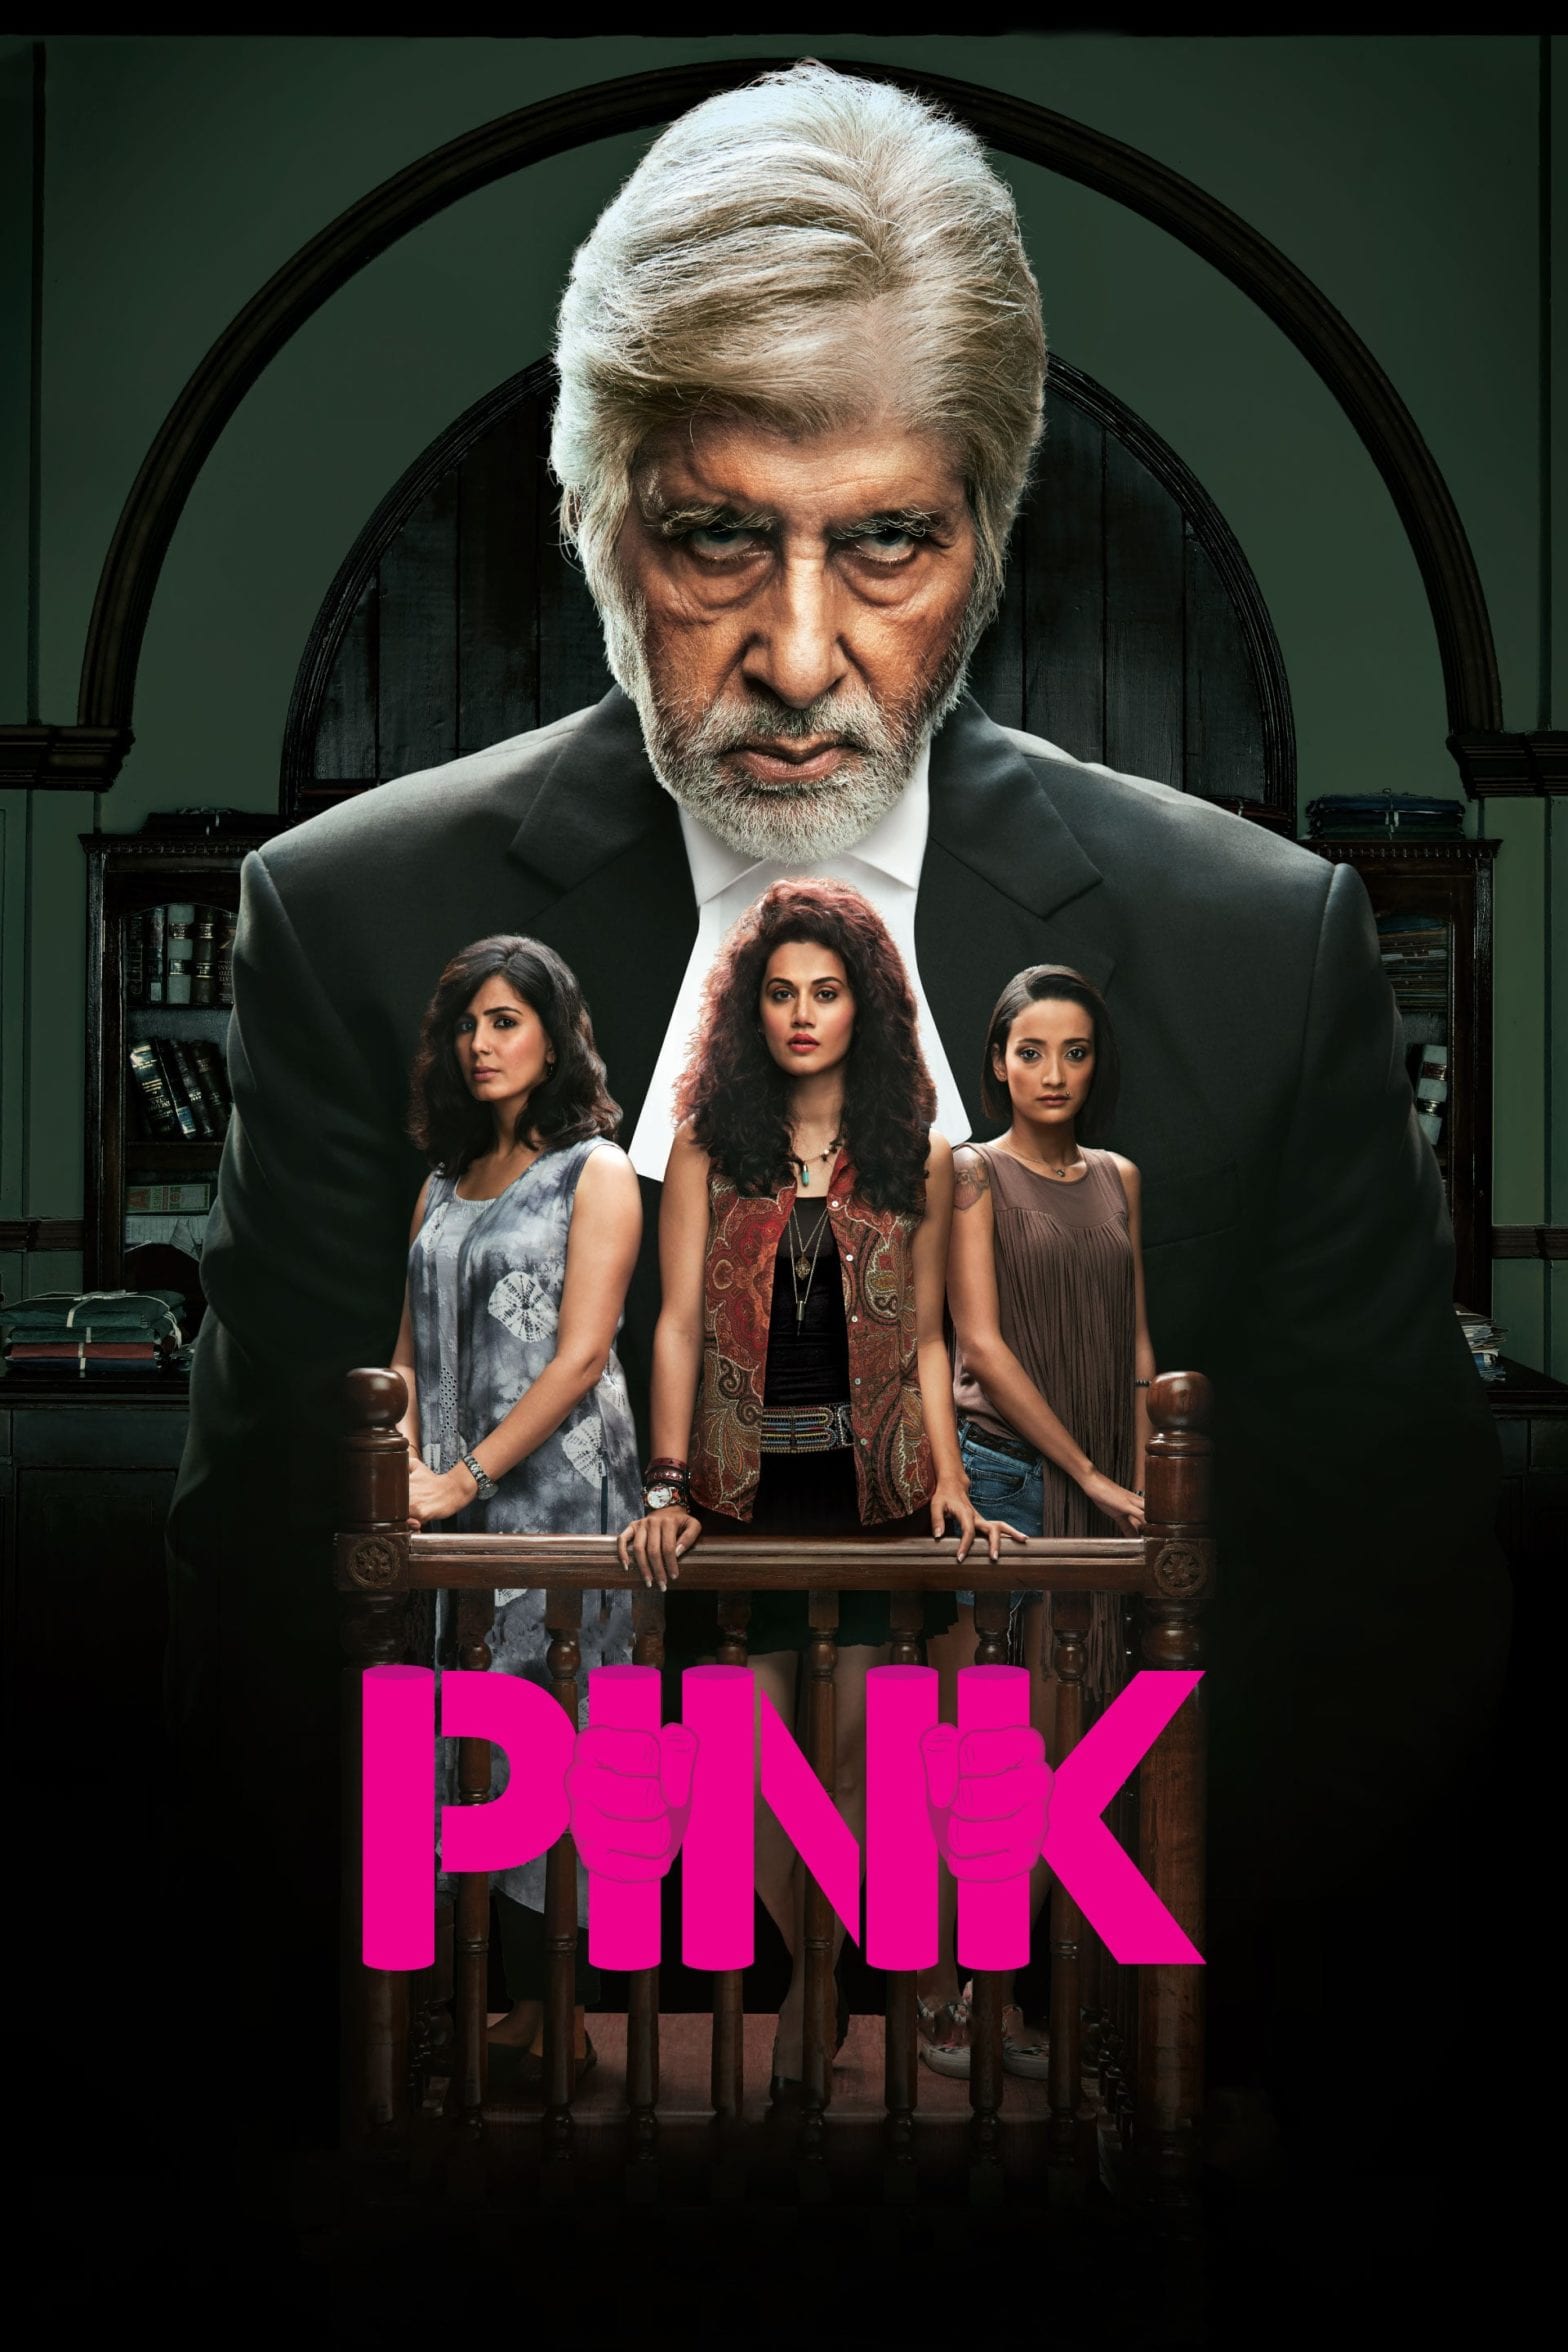 Poster for the movie "Pink"